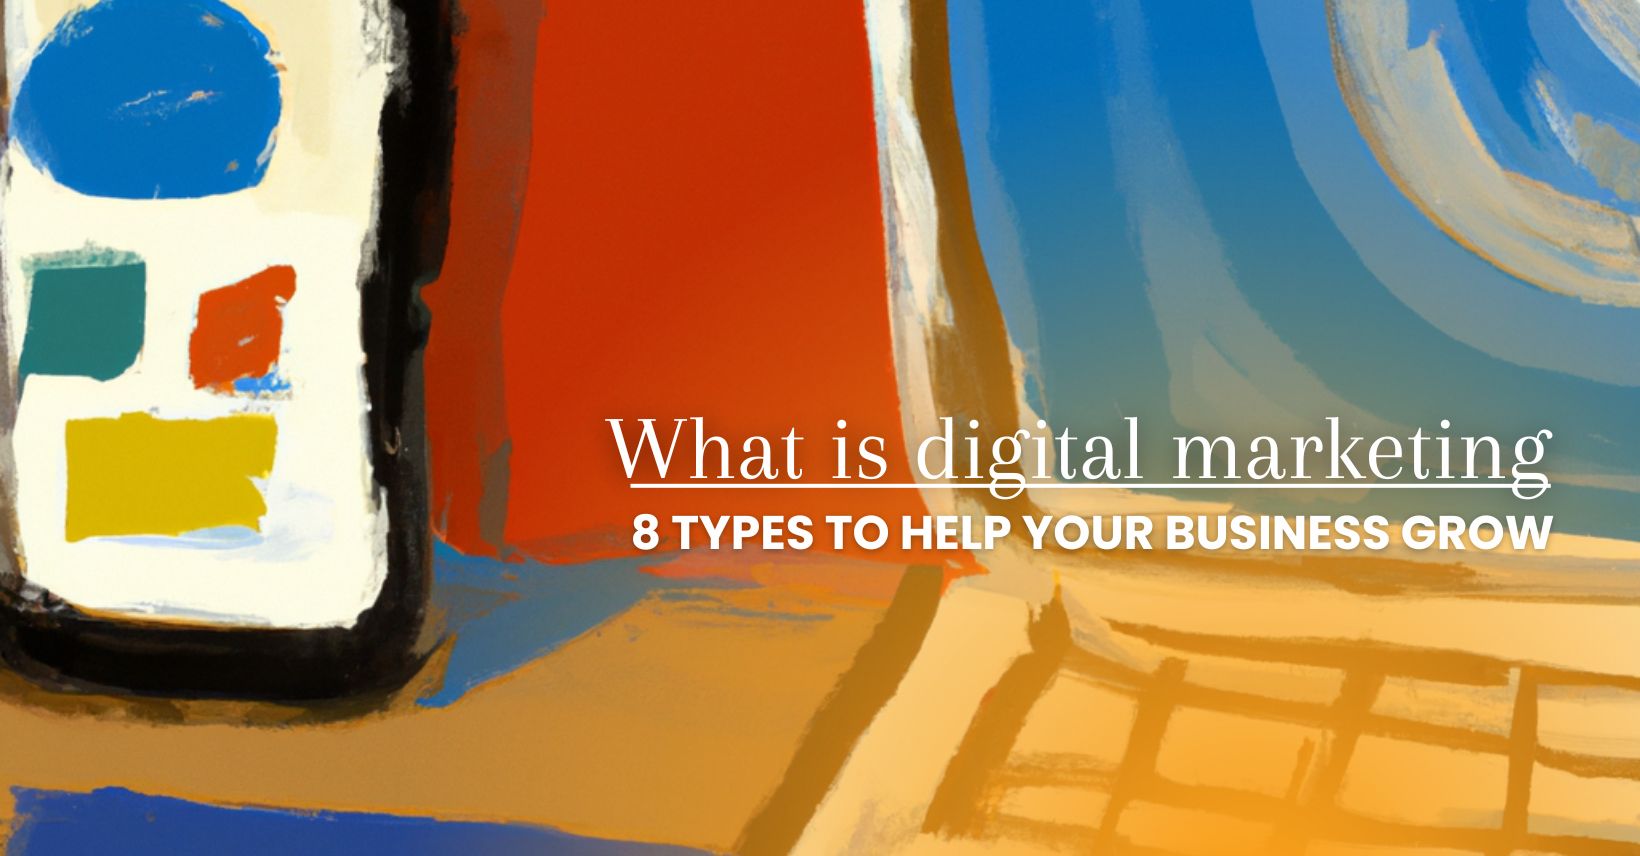 WHAT IS DIGITAL MARKETING 8 TYPES TO HELP YOUR BUSINESS GROW